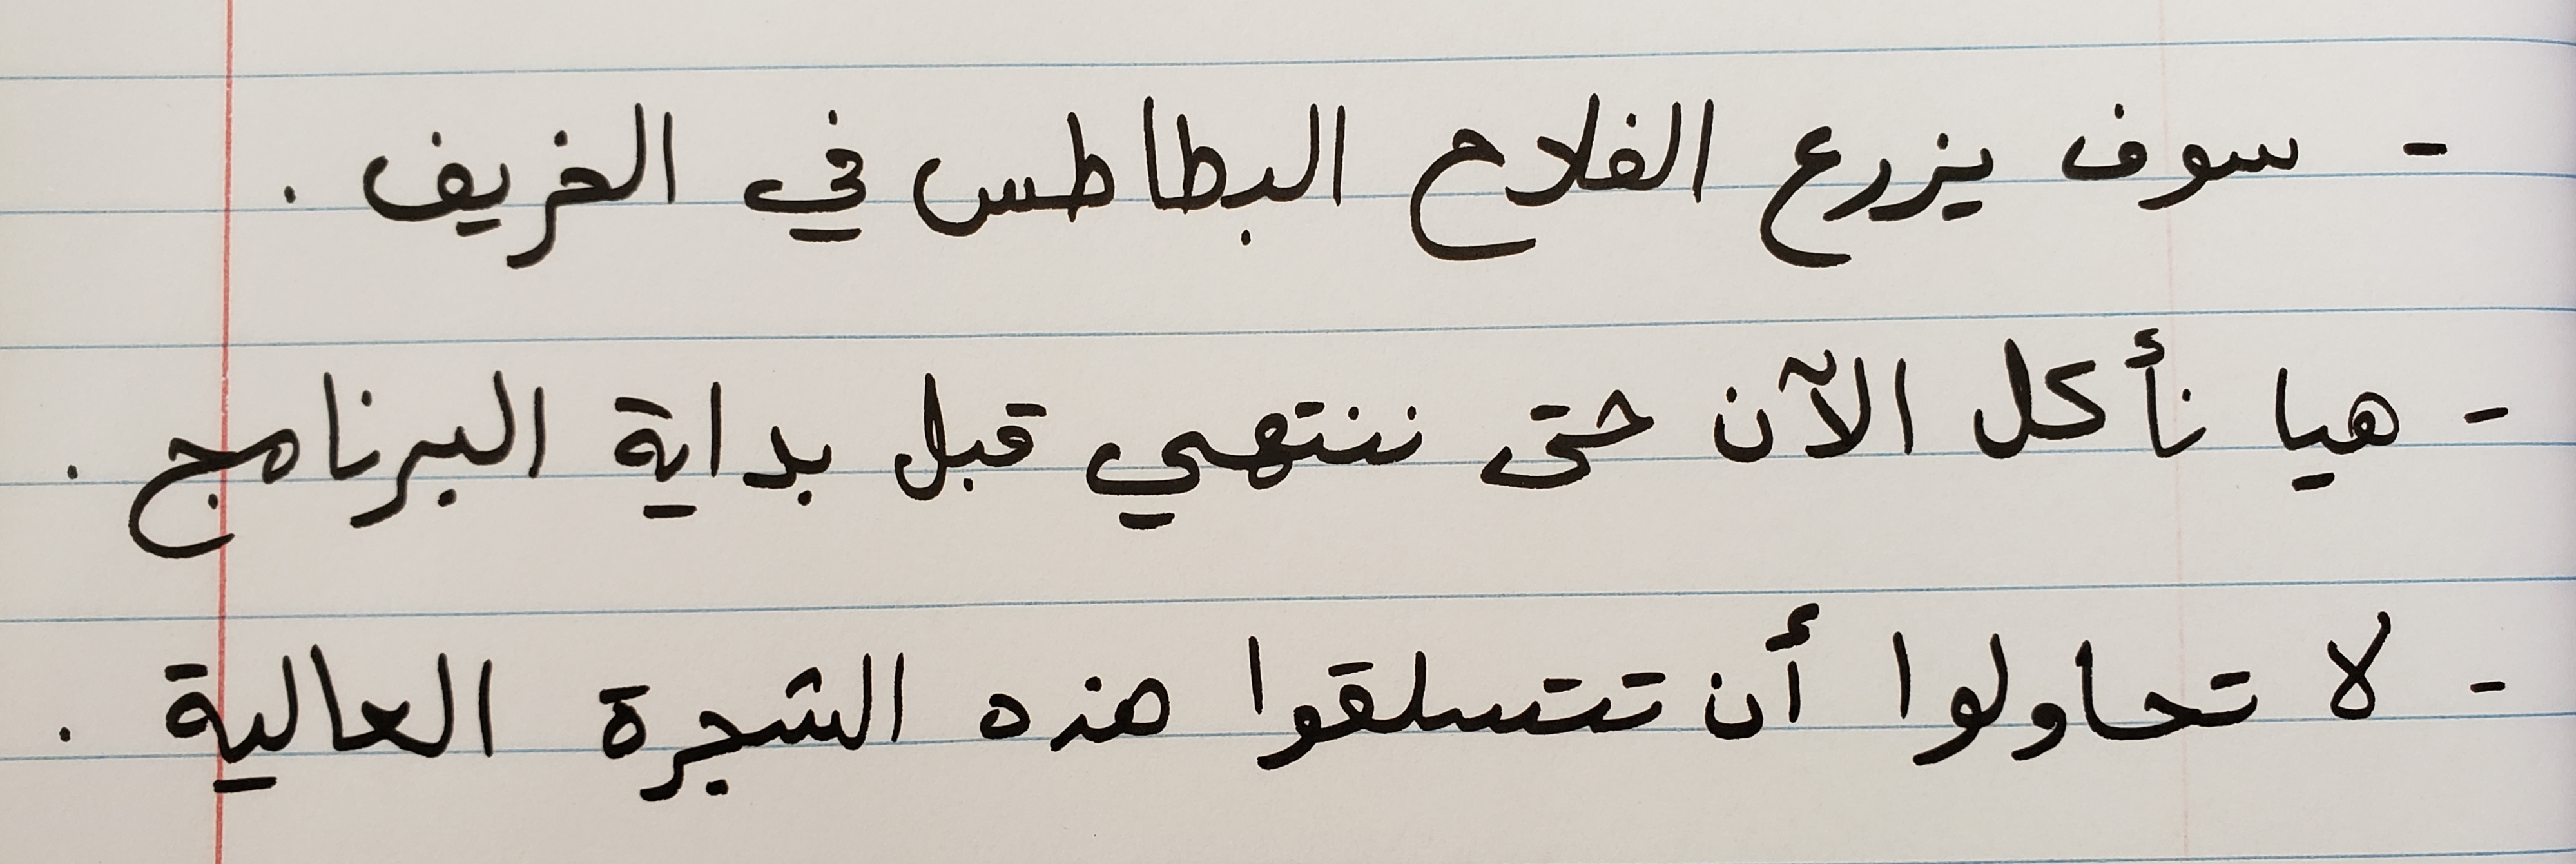  A handwritten note in Arabic script on lined paper that says 'user friendly Arabic writing app with handwriting recognition for beginners'.